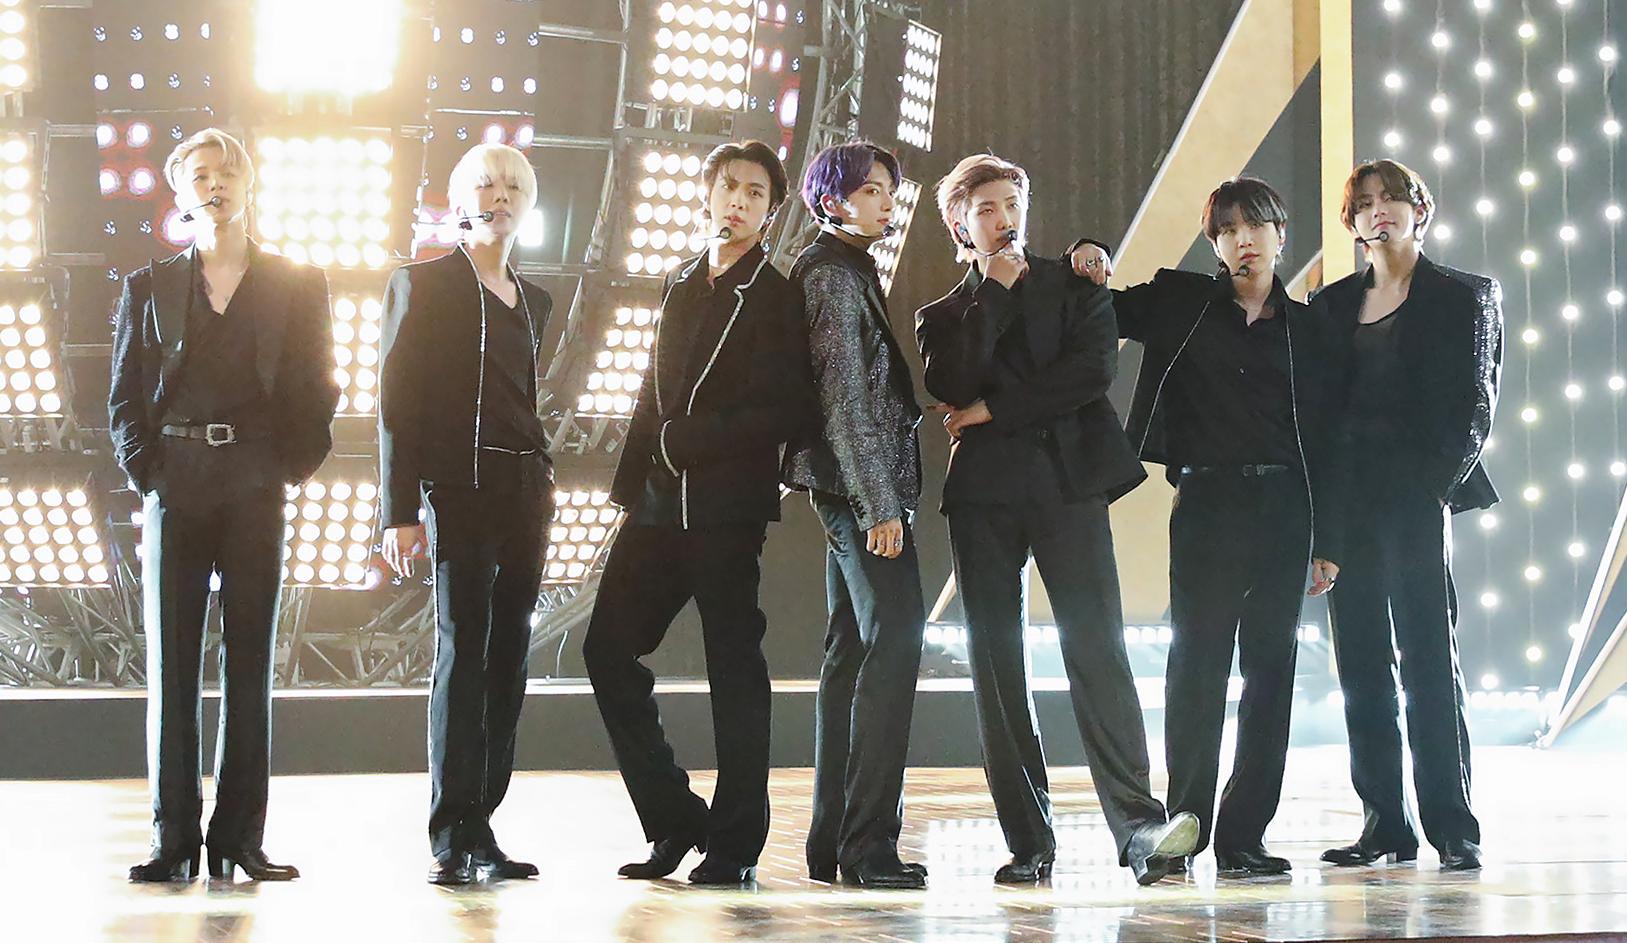 Members of BTS standing on a stage with dramatic lighting